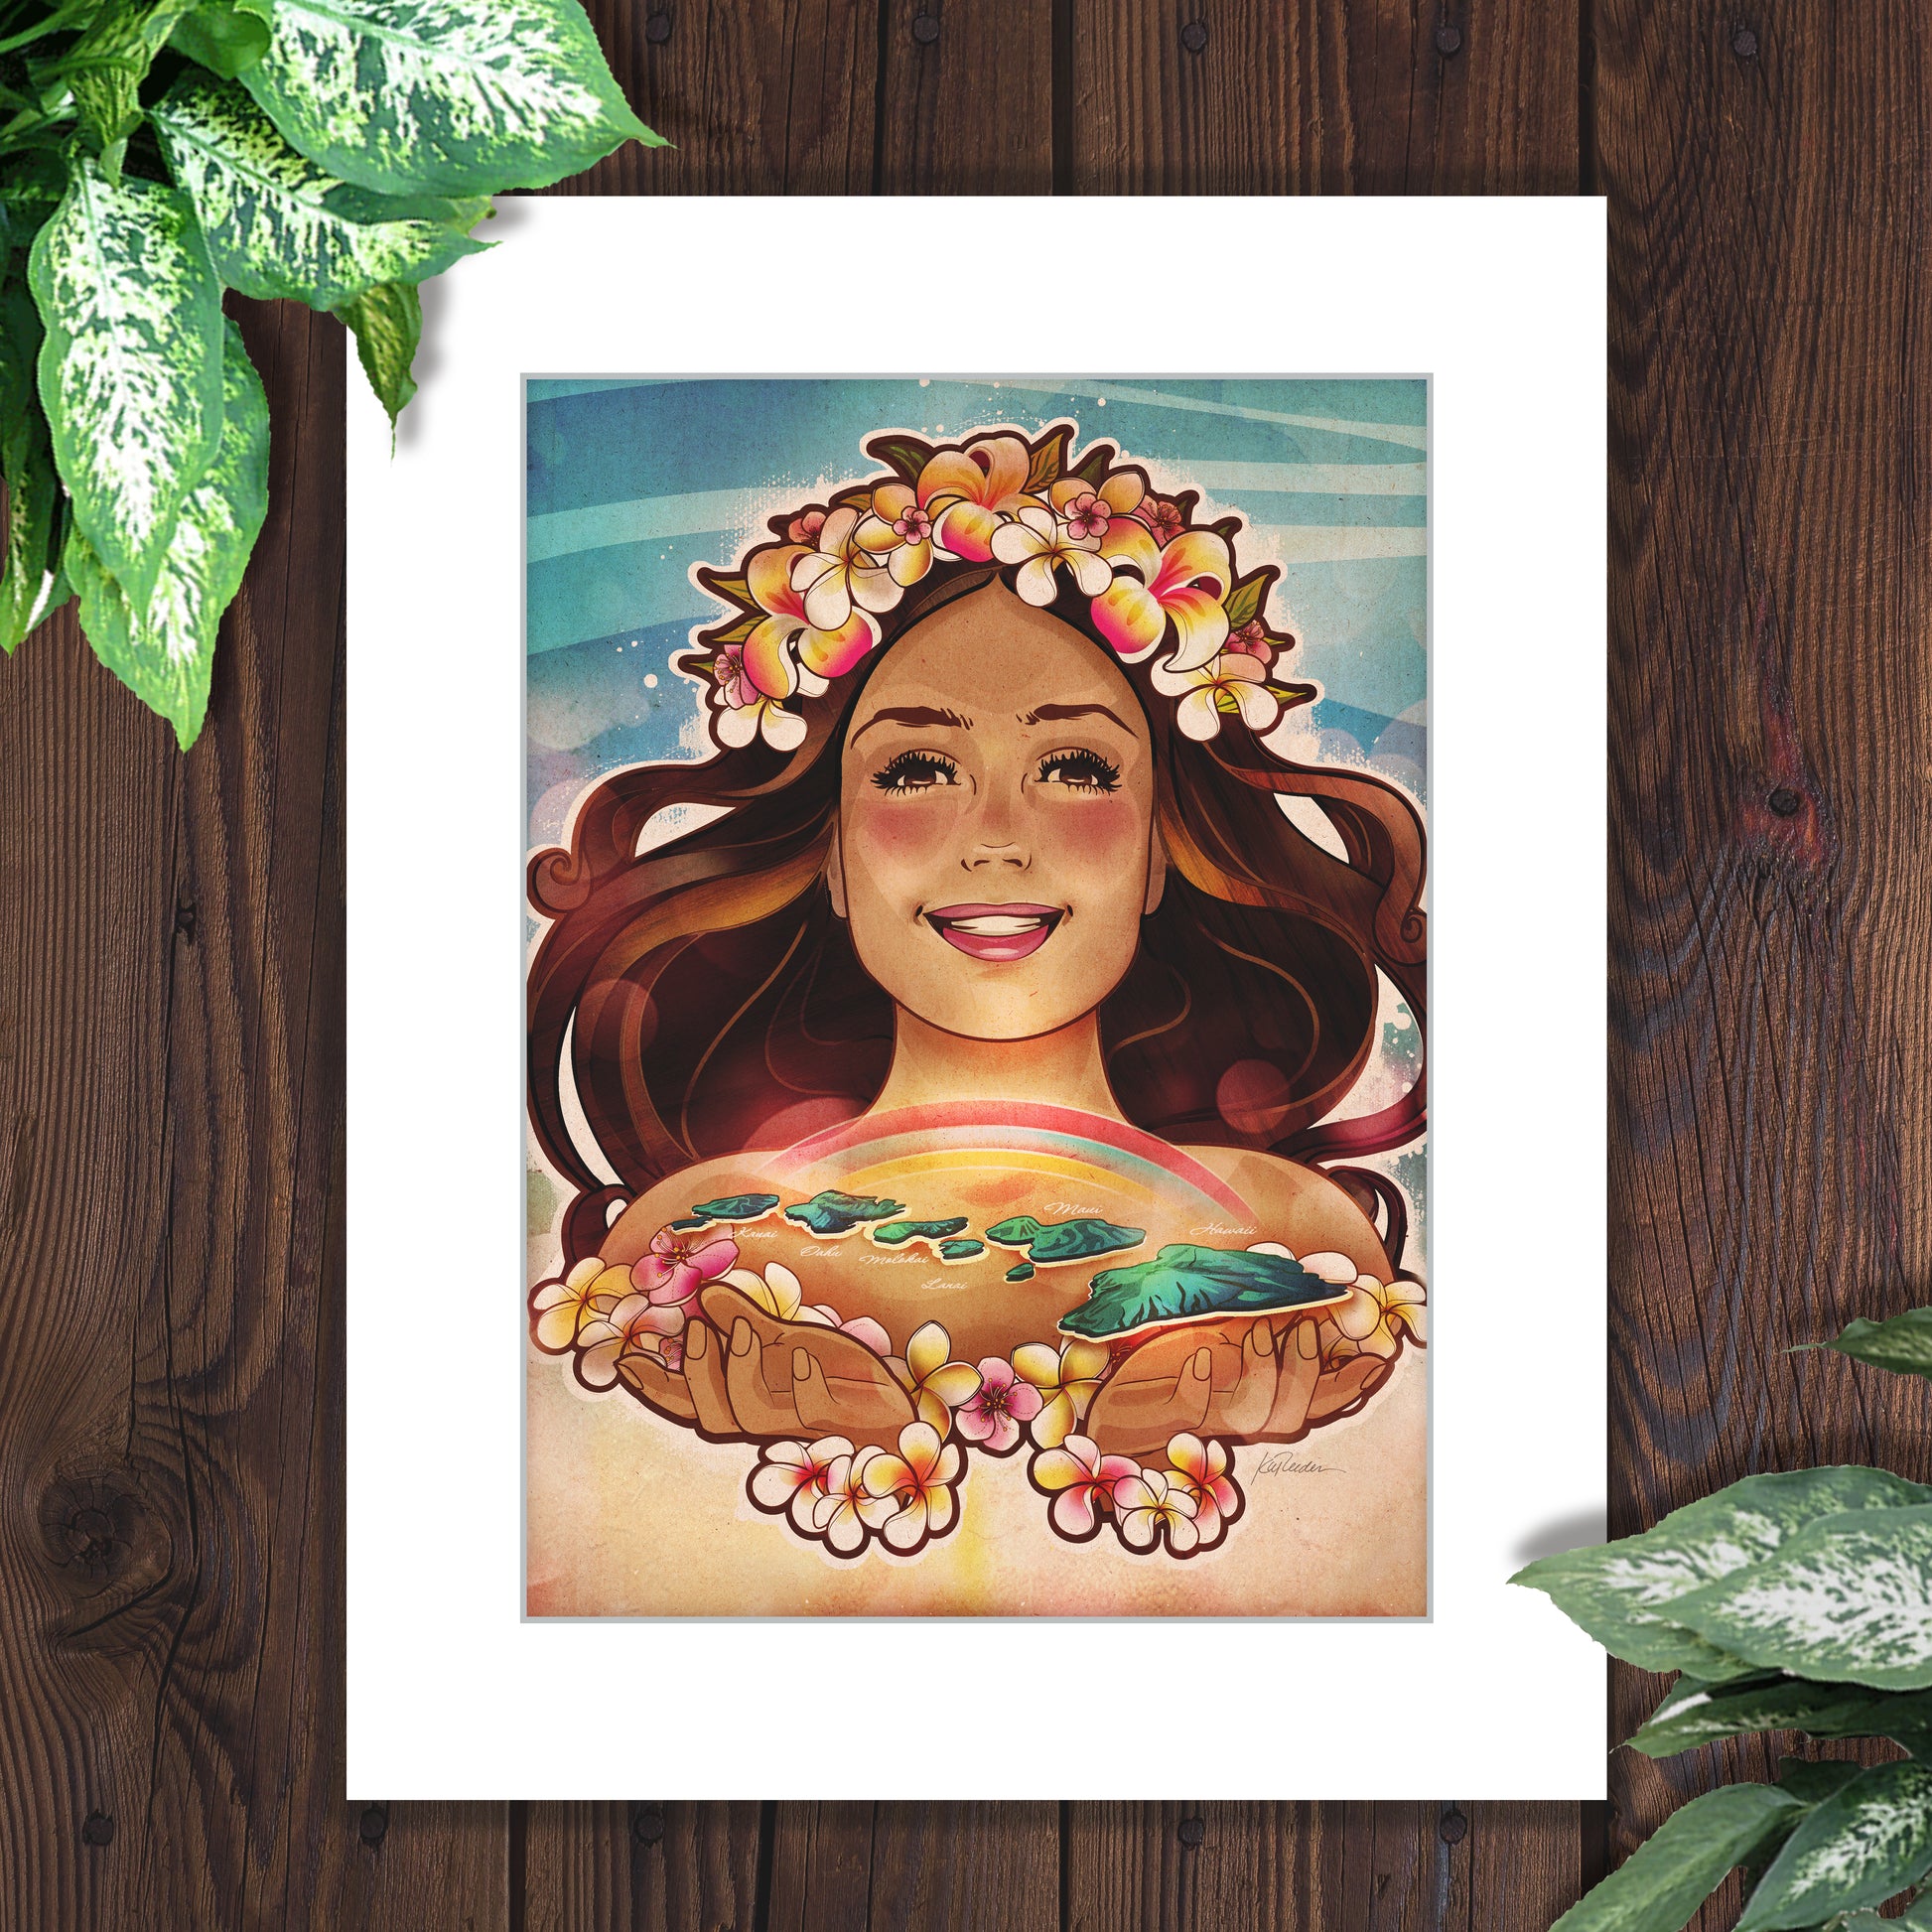 retro style illustration of a hula girl with her hands cradling Hawaiian islands. Featuring a mix of art nouveau and 70s vintage poster illustration. 